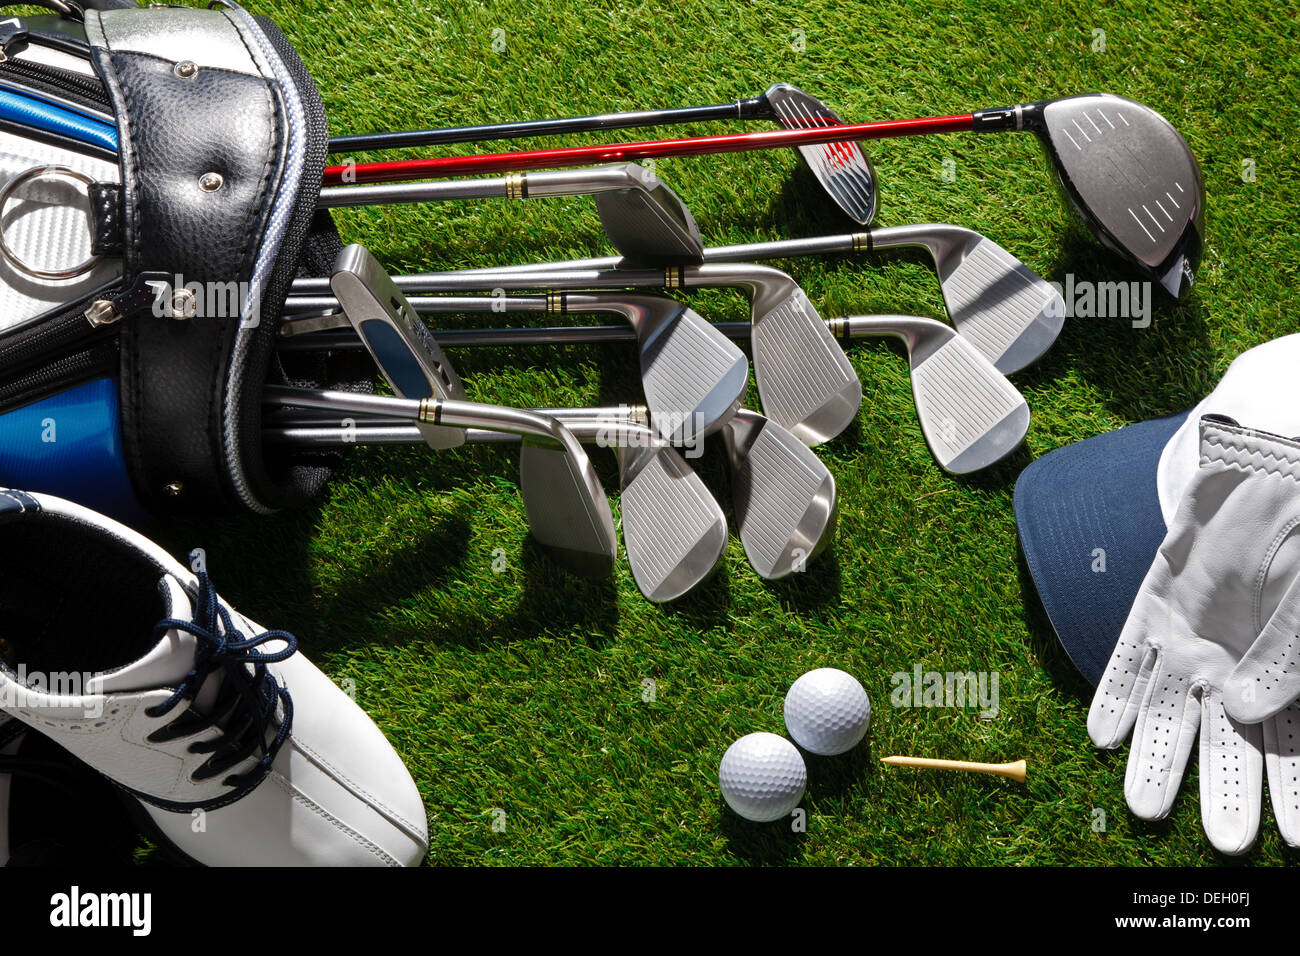 Golf clubs,shoes,balls,hat and glove Stock Photo - Alamy